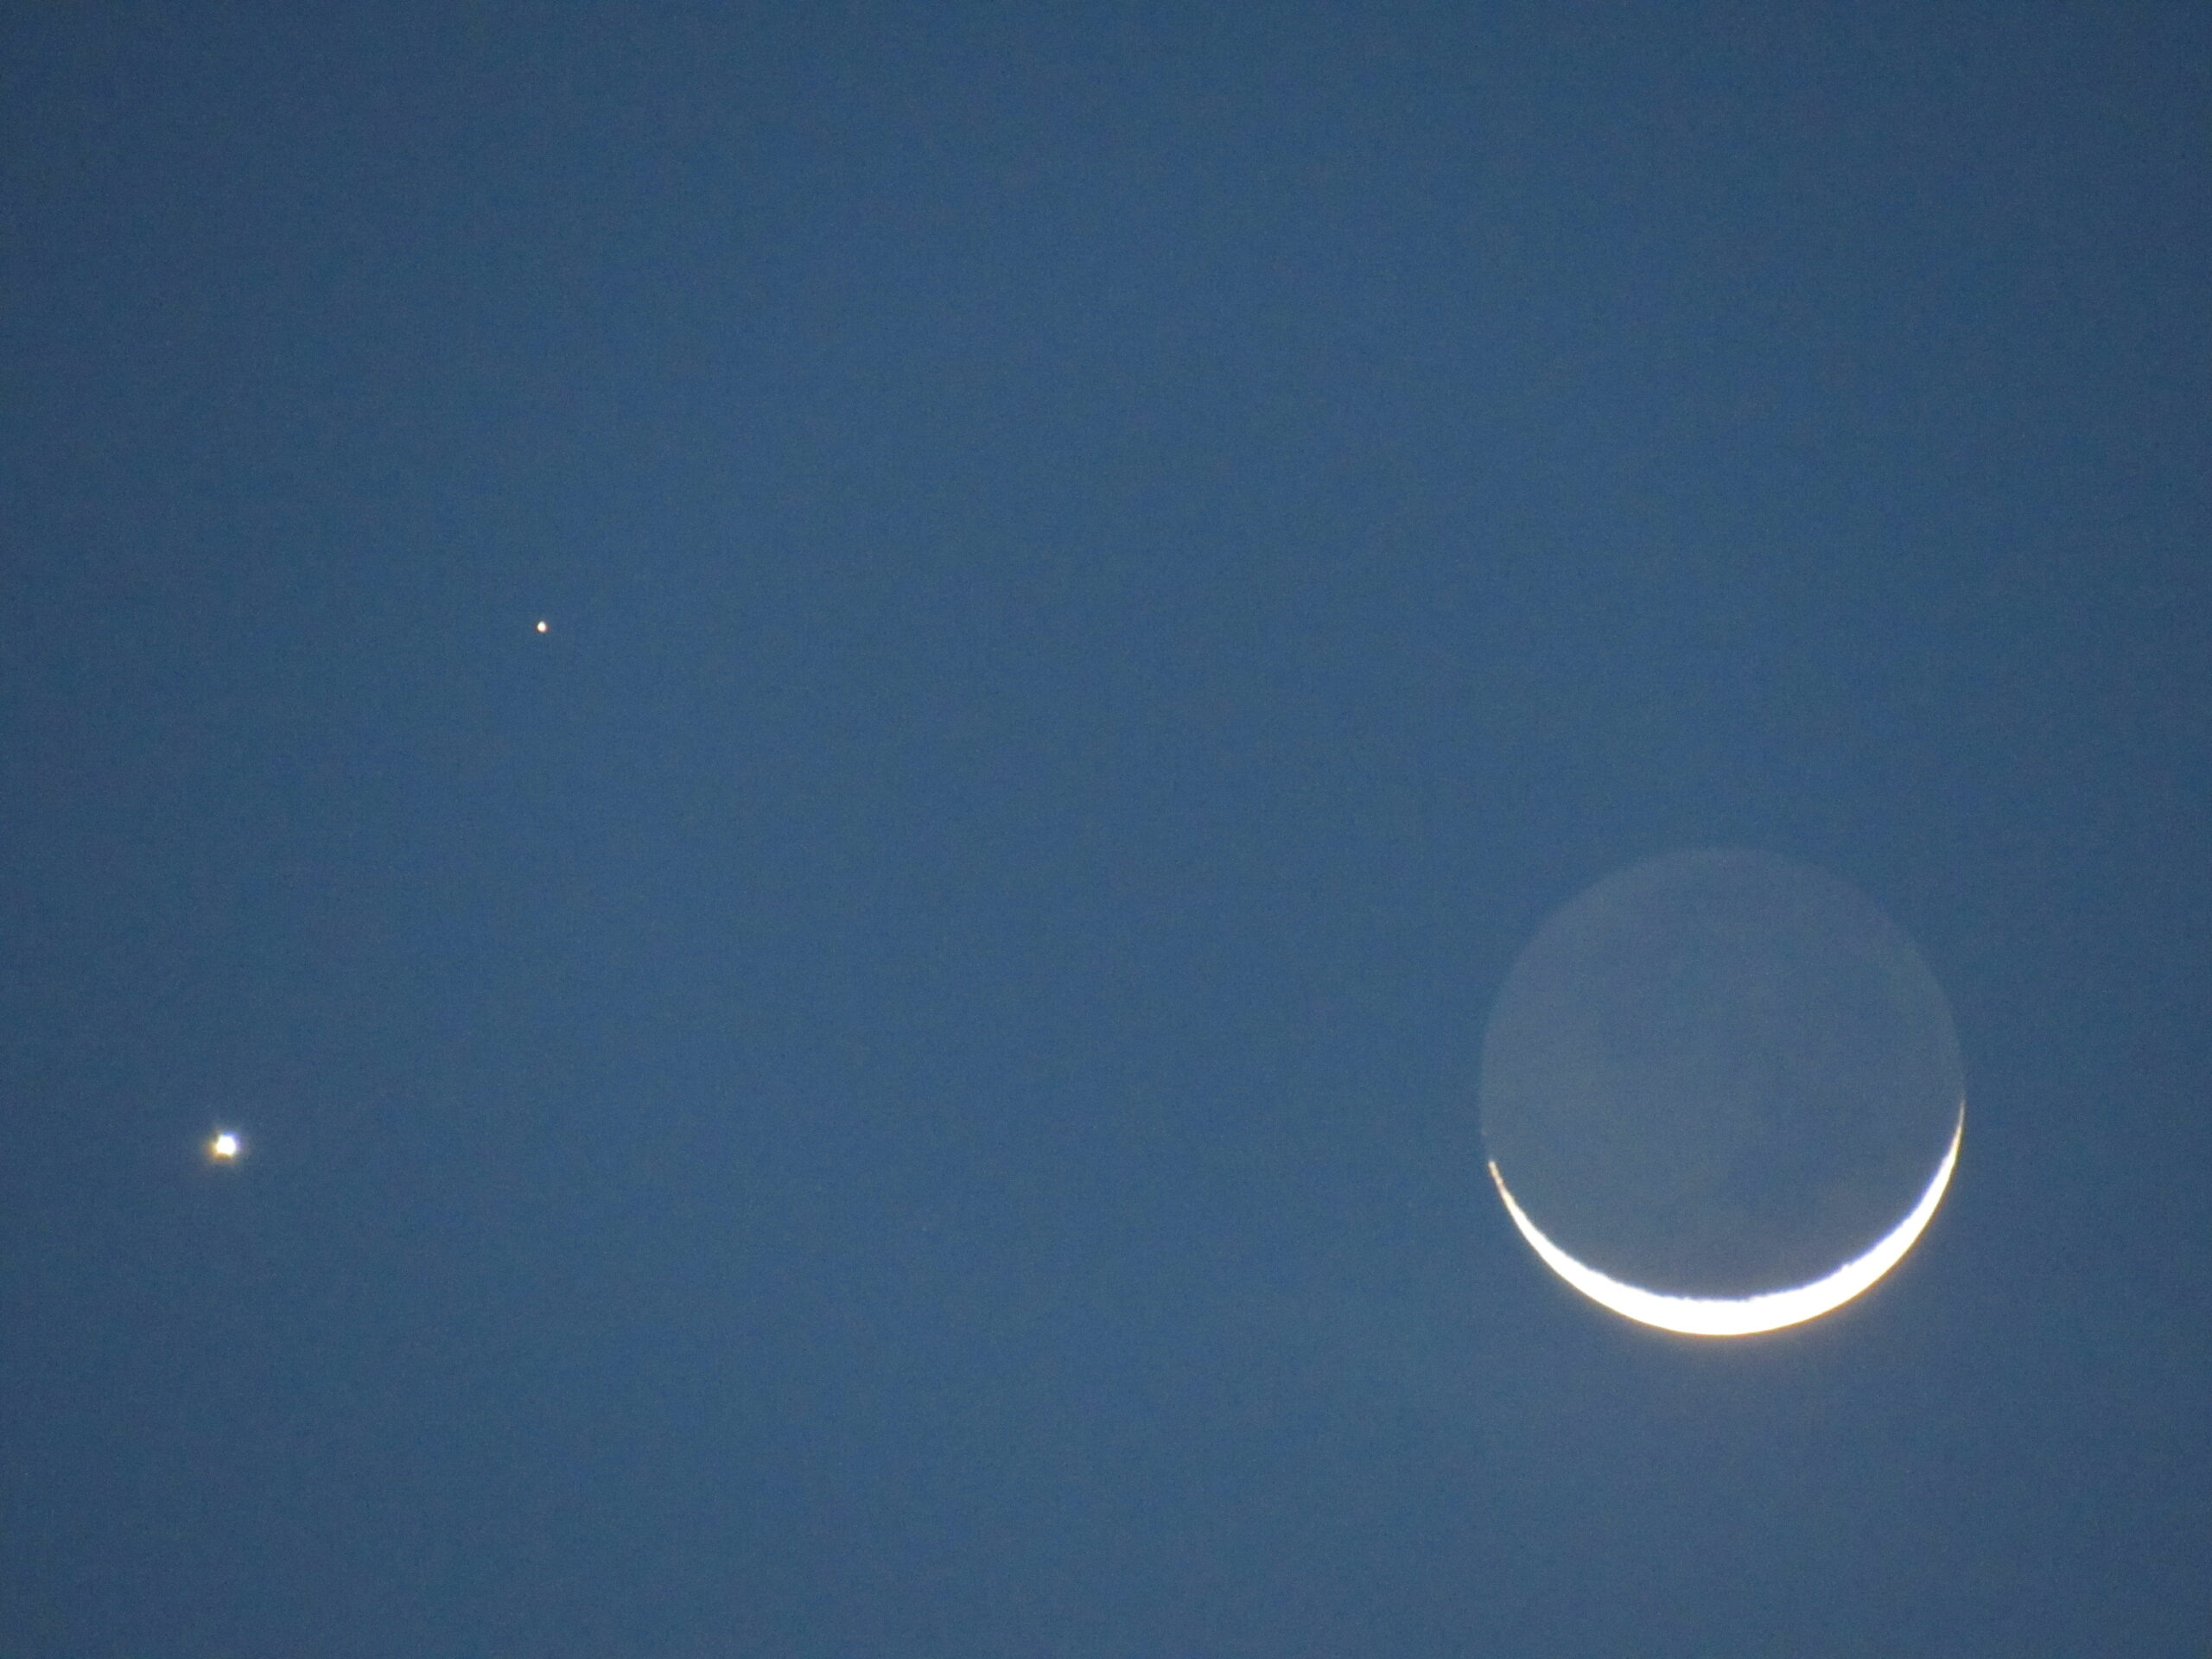 A photograph of the new moon by James Havard, via Creative Commons